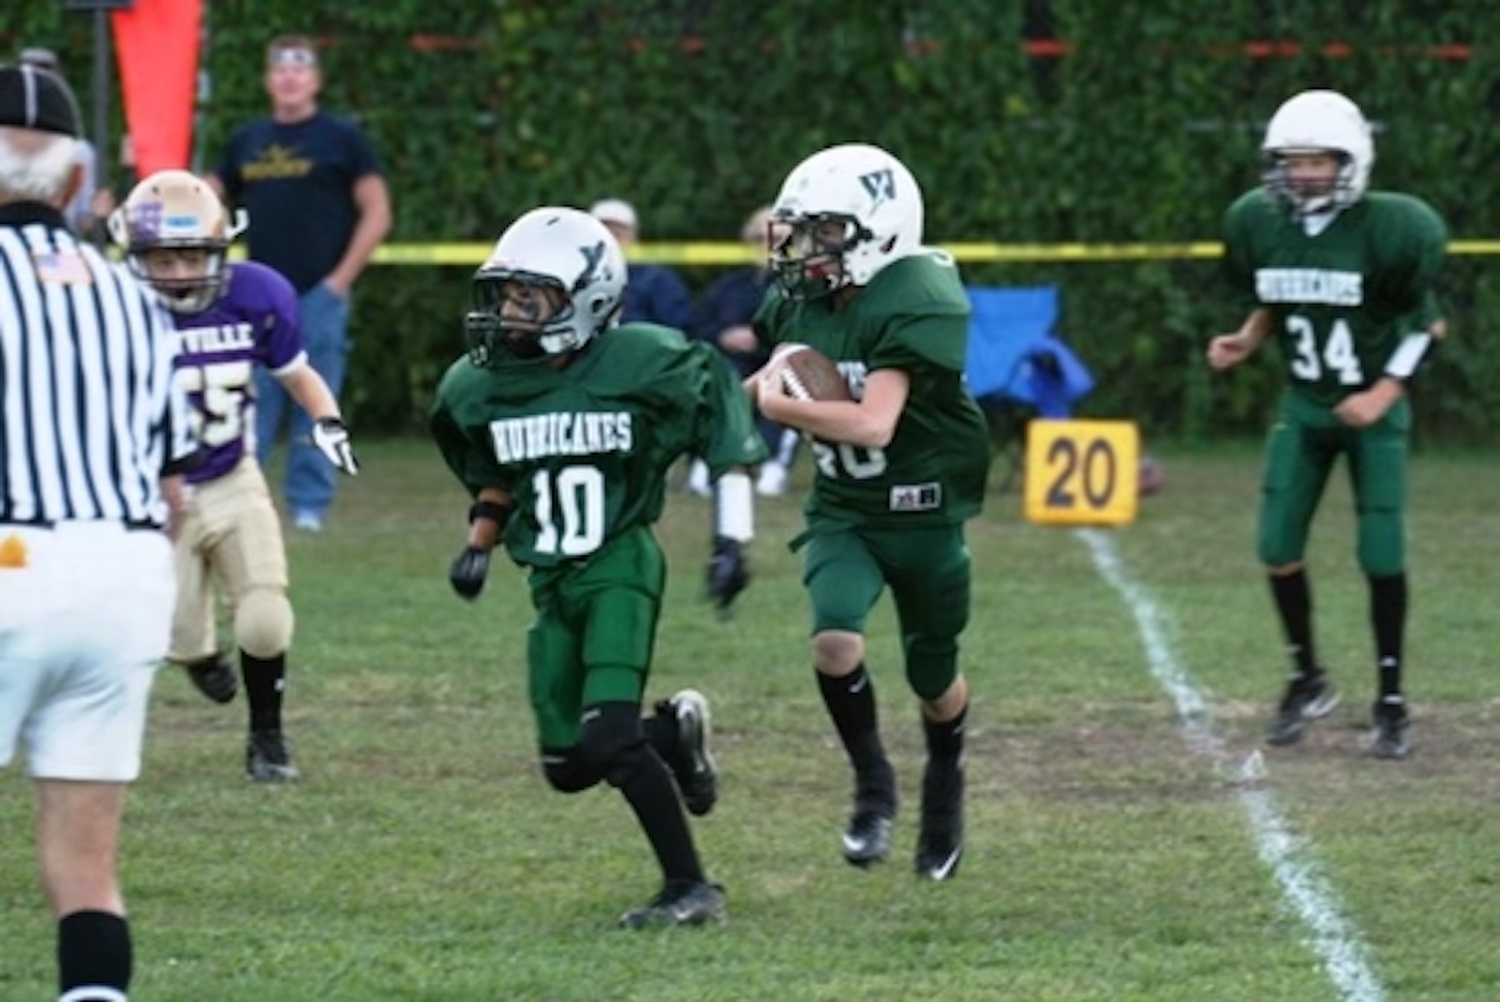 Dylan Laube playing youth football.